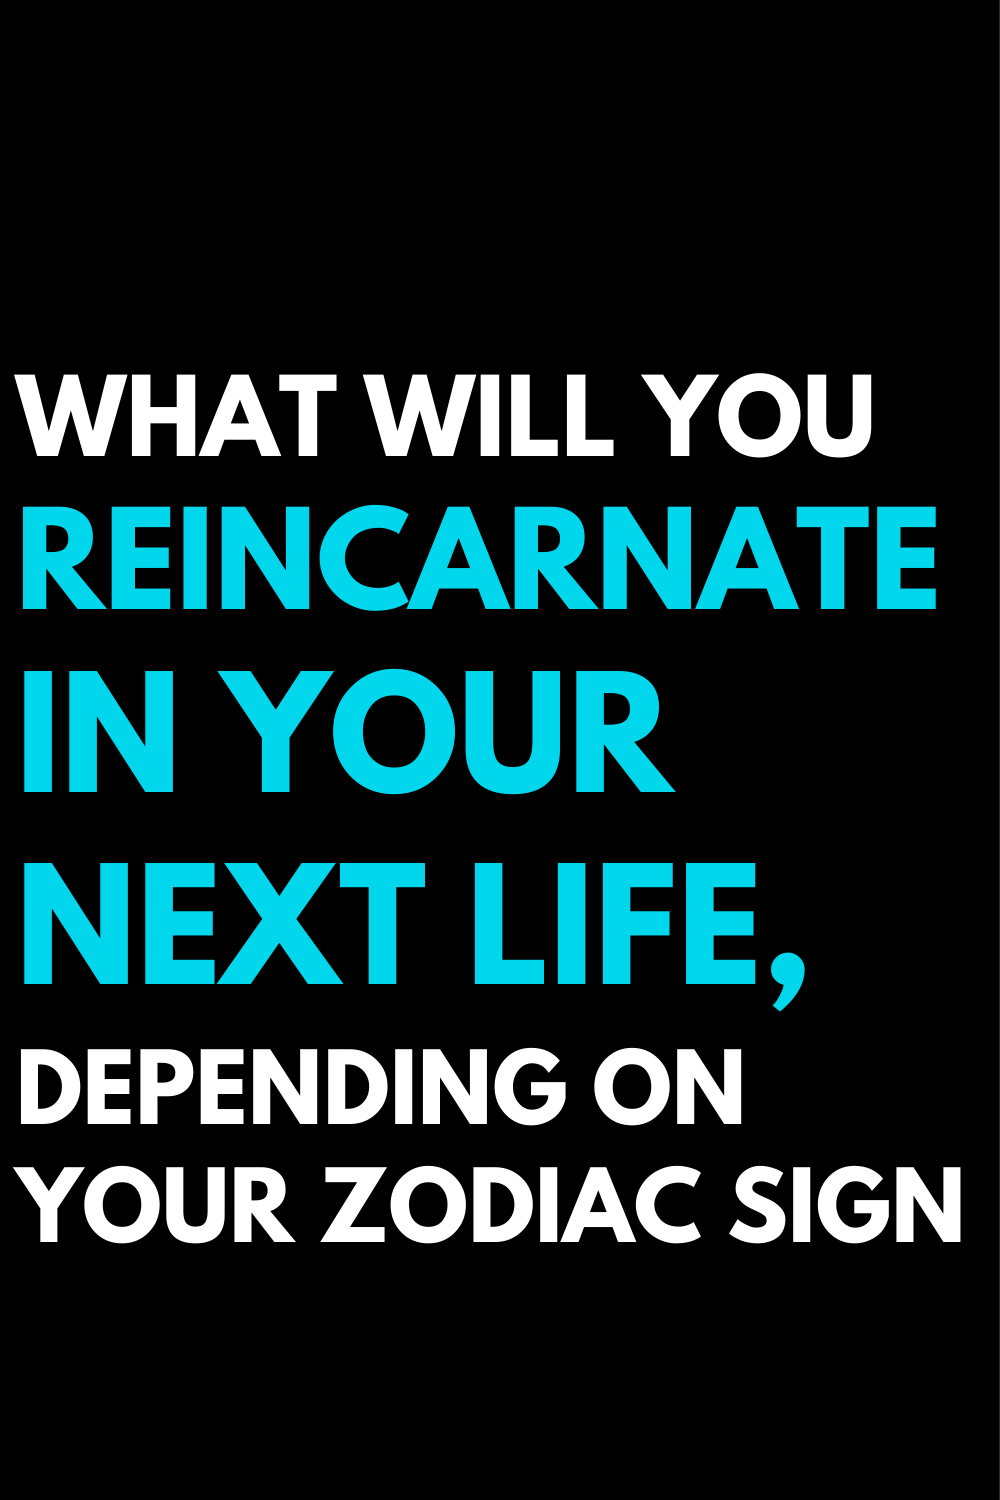 What will you reincarnate in your next life, depending on your zodiac sign